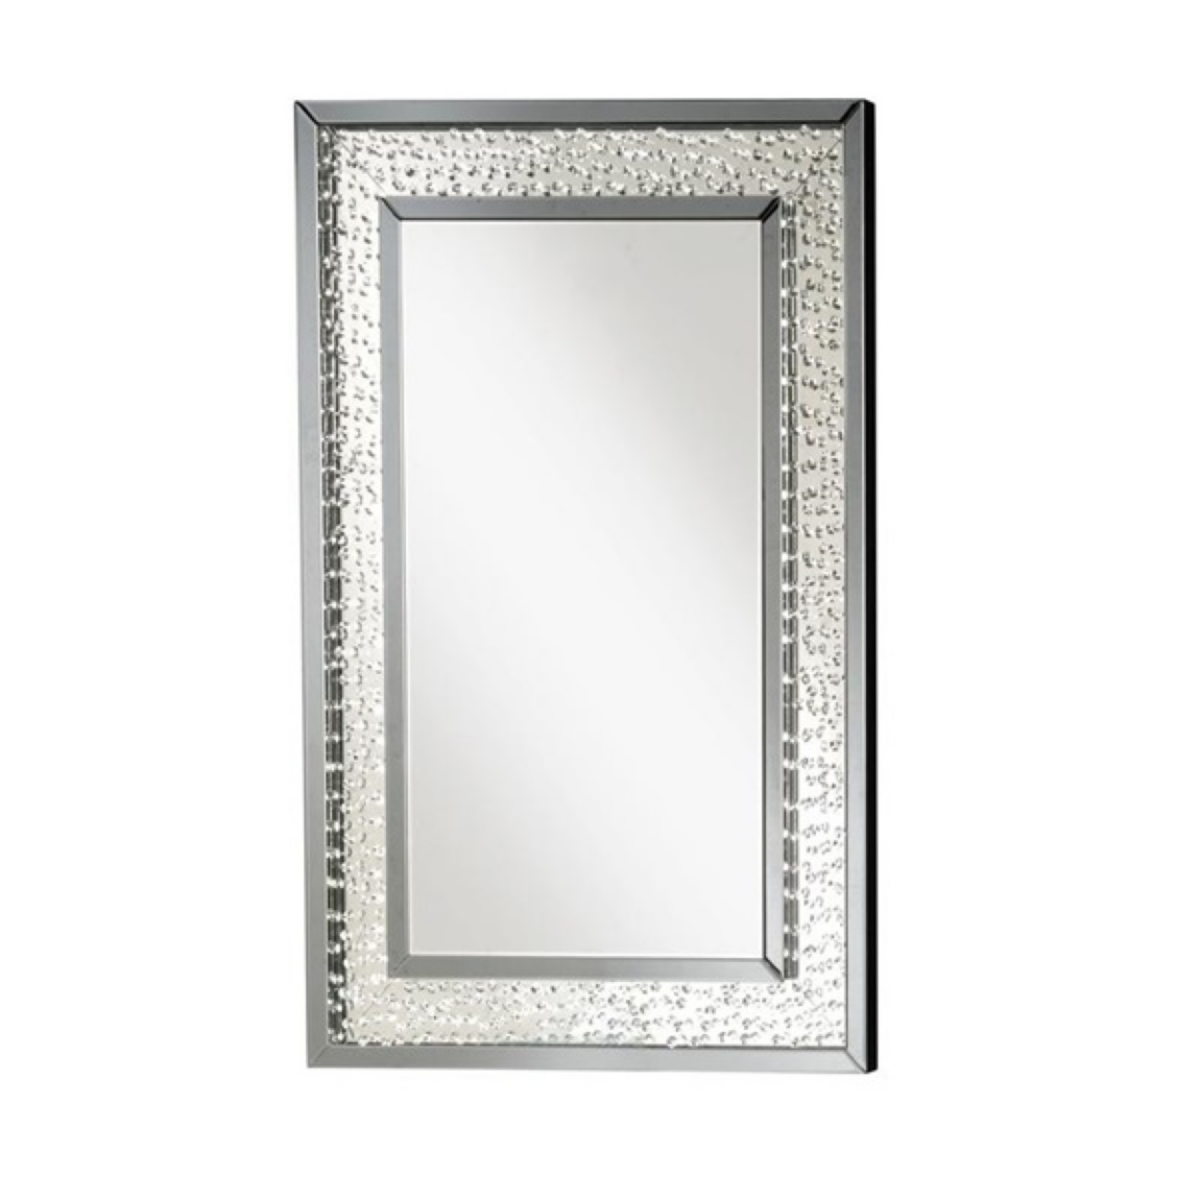 Nysa Wall Decor In Mirrored & Faux Crystals - Silver